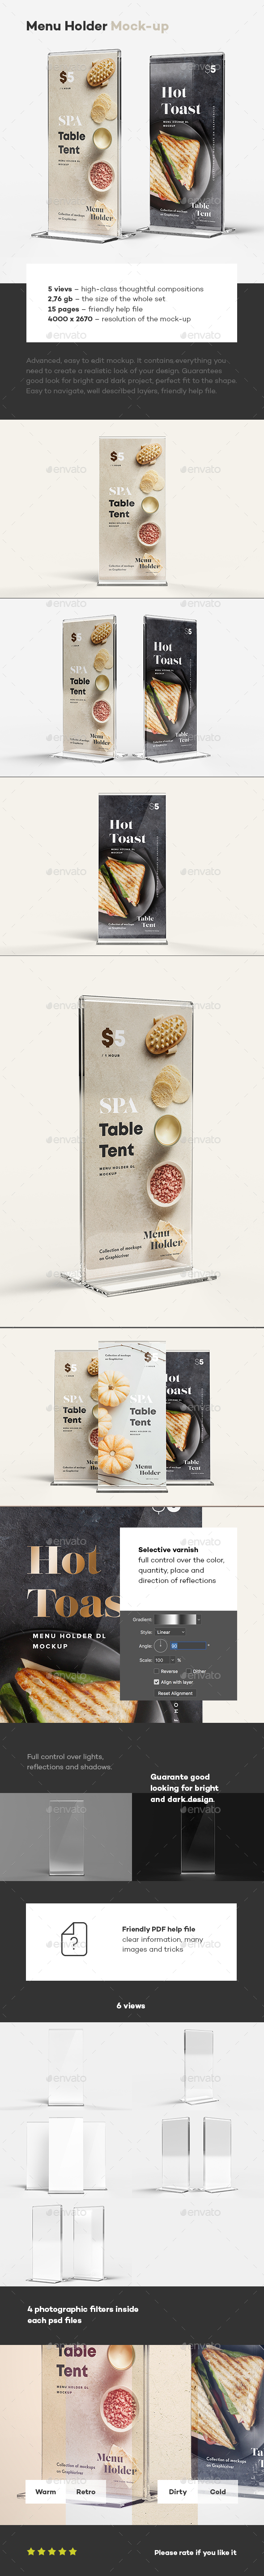 Download Menu Mockup Graphics Designs Templates From Graphicriver